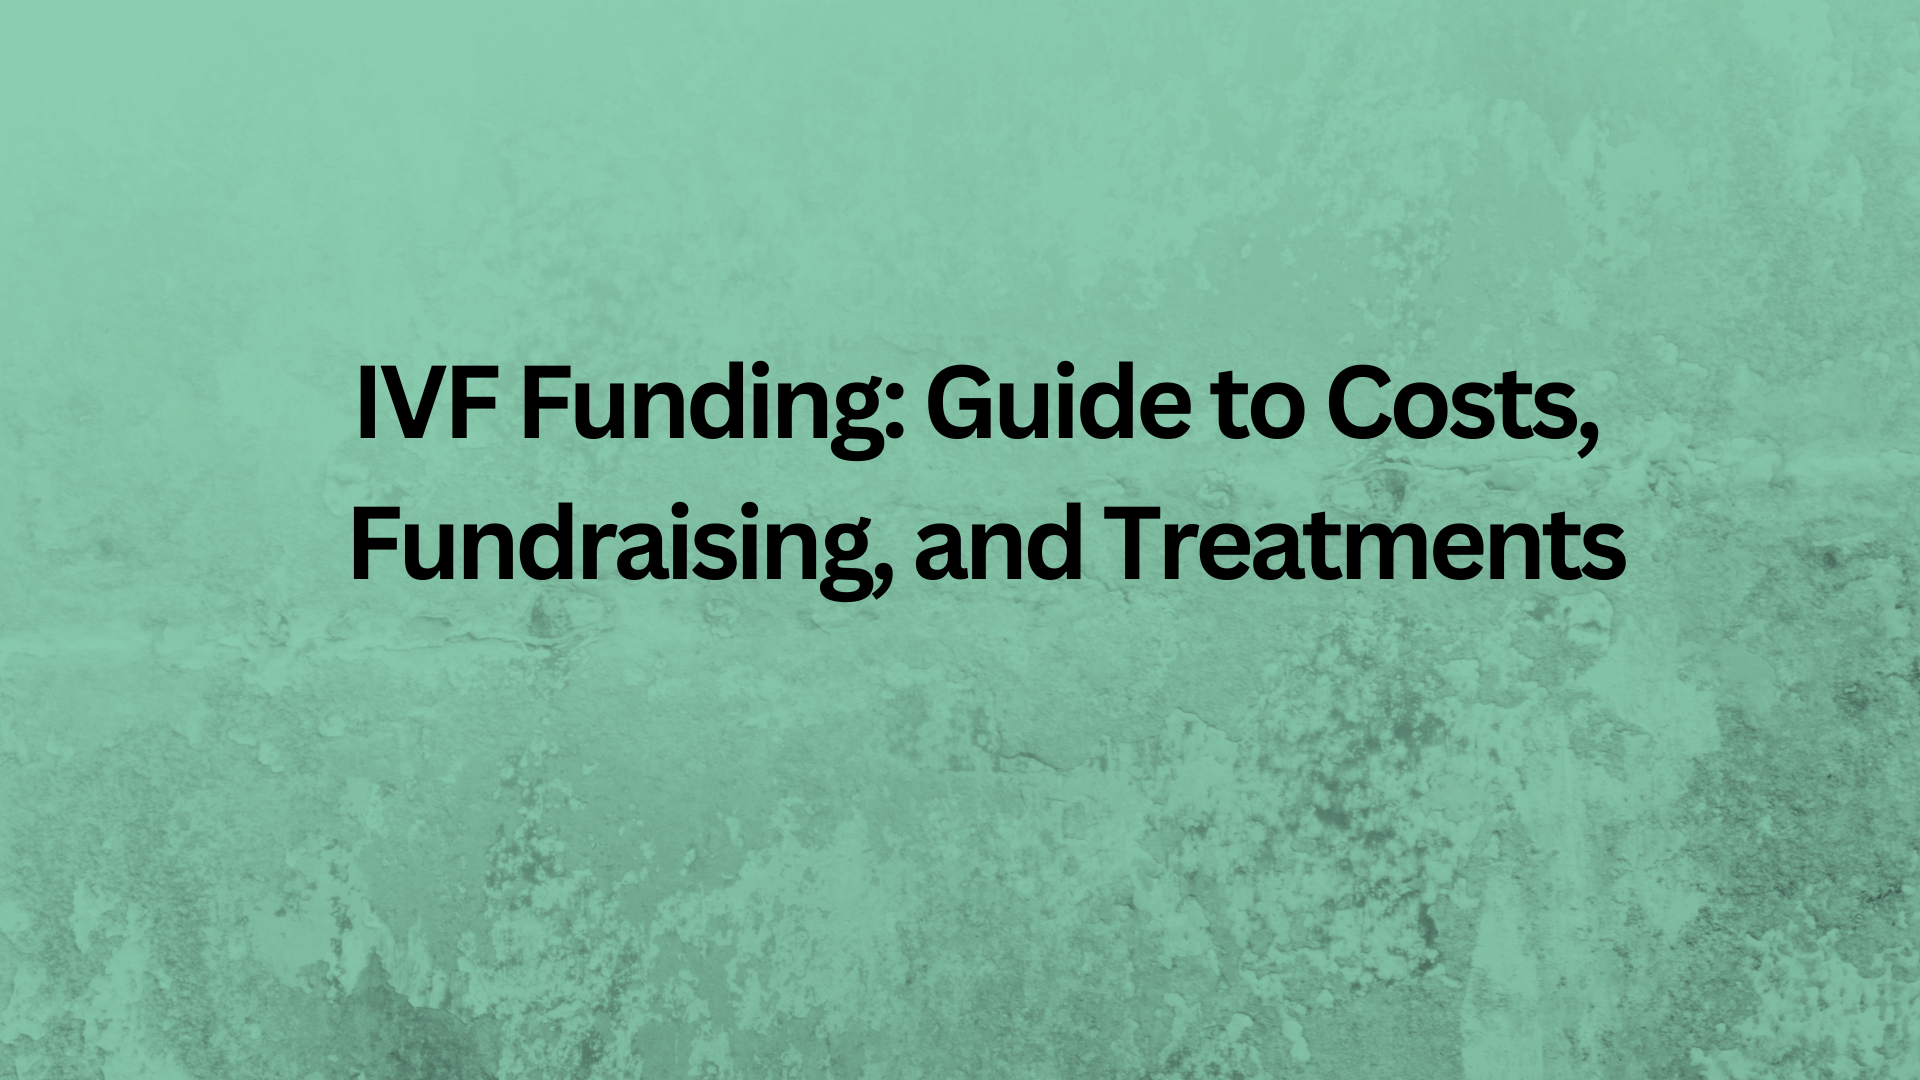 IVF Funding: Guide to Costs, Fundraising, and Treatments